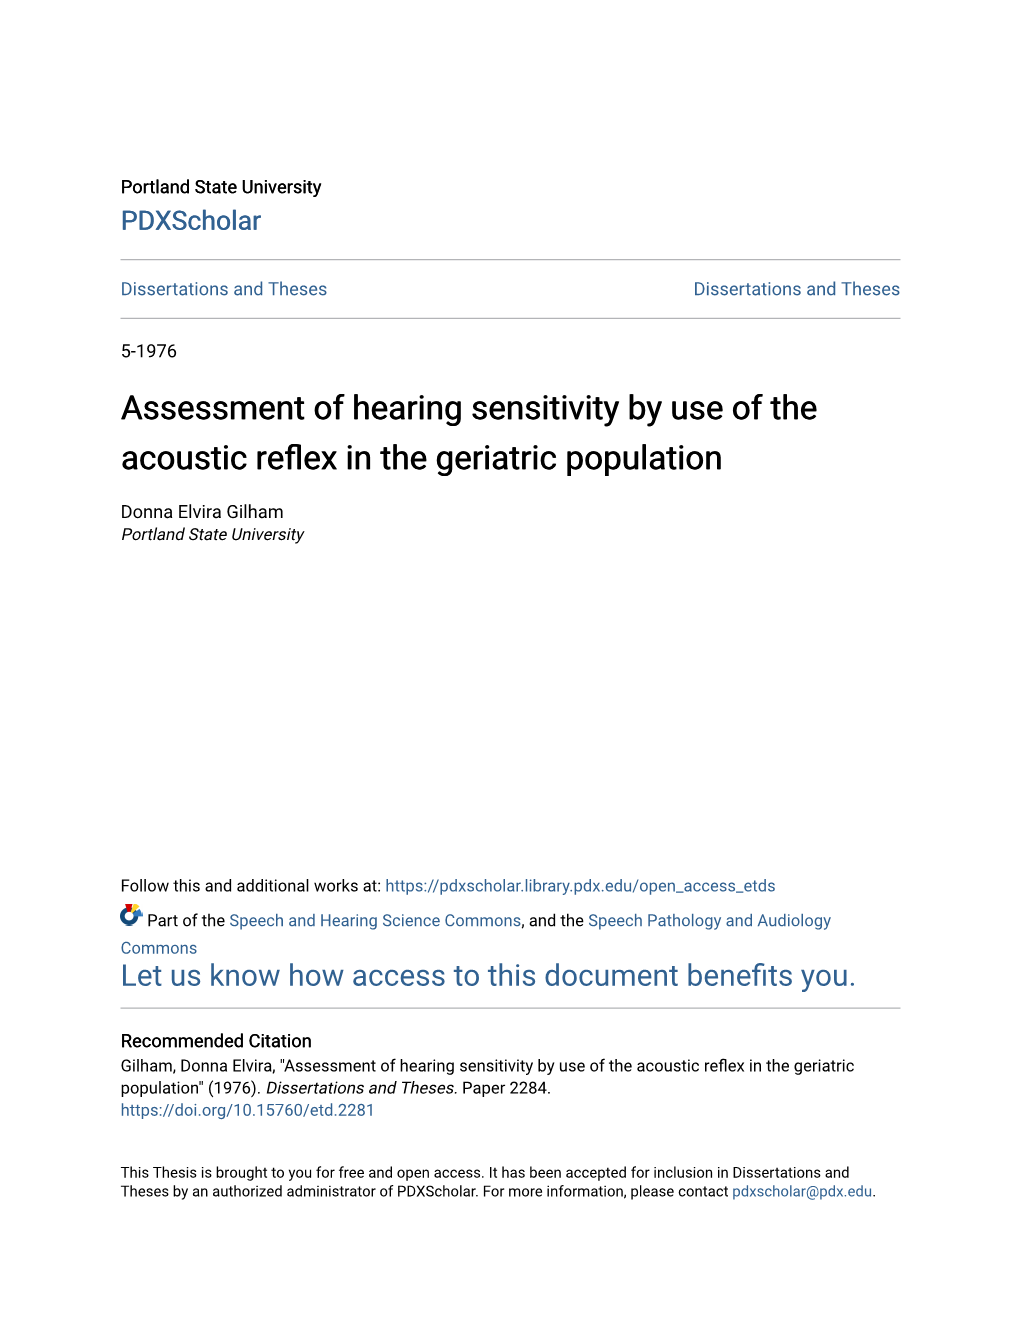 Assessment of Hearing Sensitivity by Use of the Acoustic Reflex in the Geriatric Population